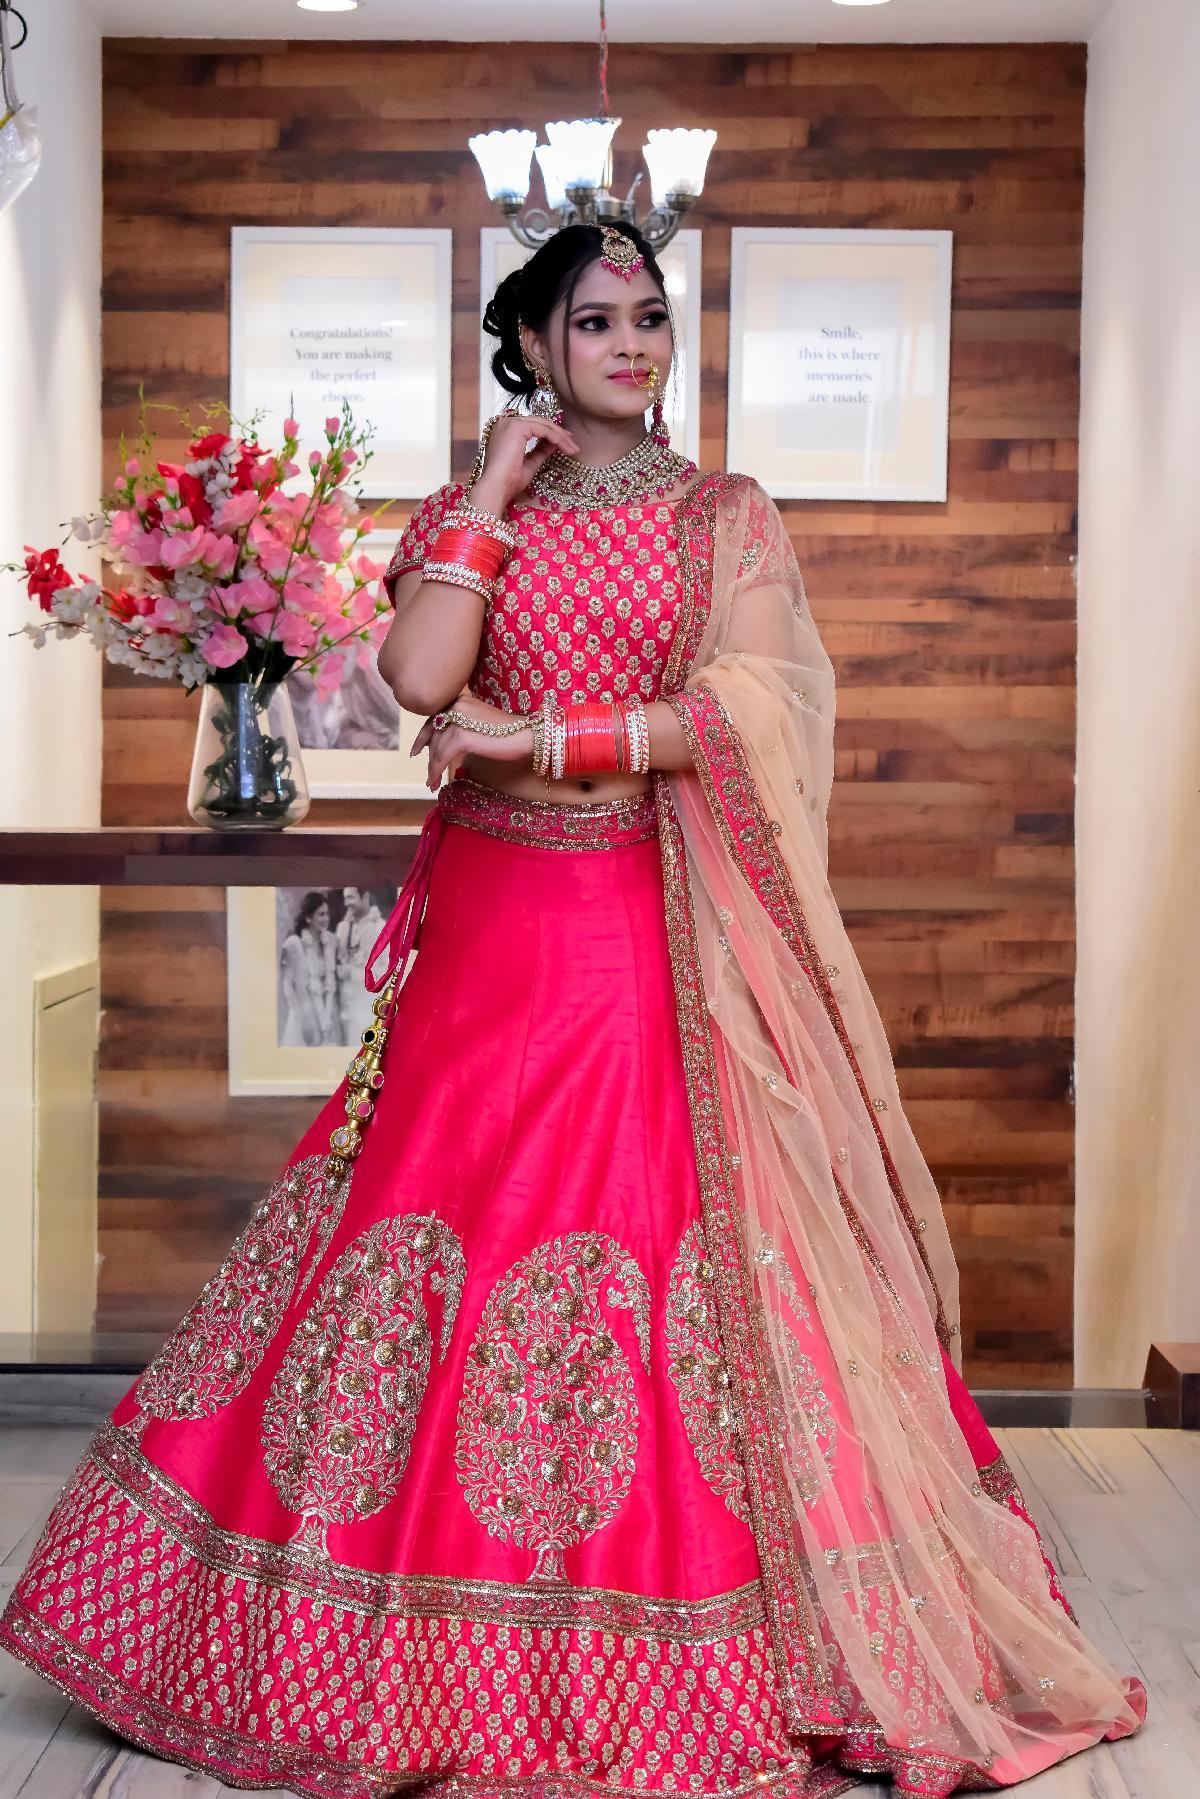 How much does a bridal lehenga cost? - Quora